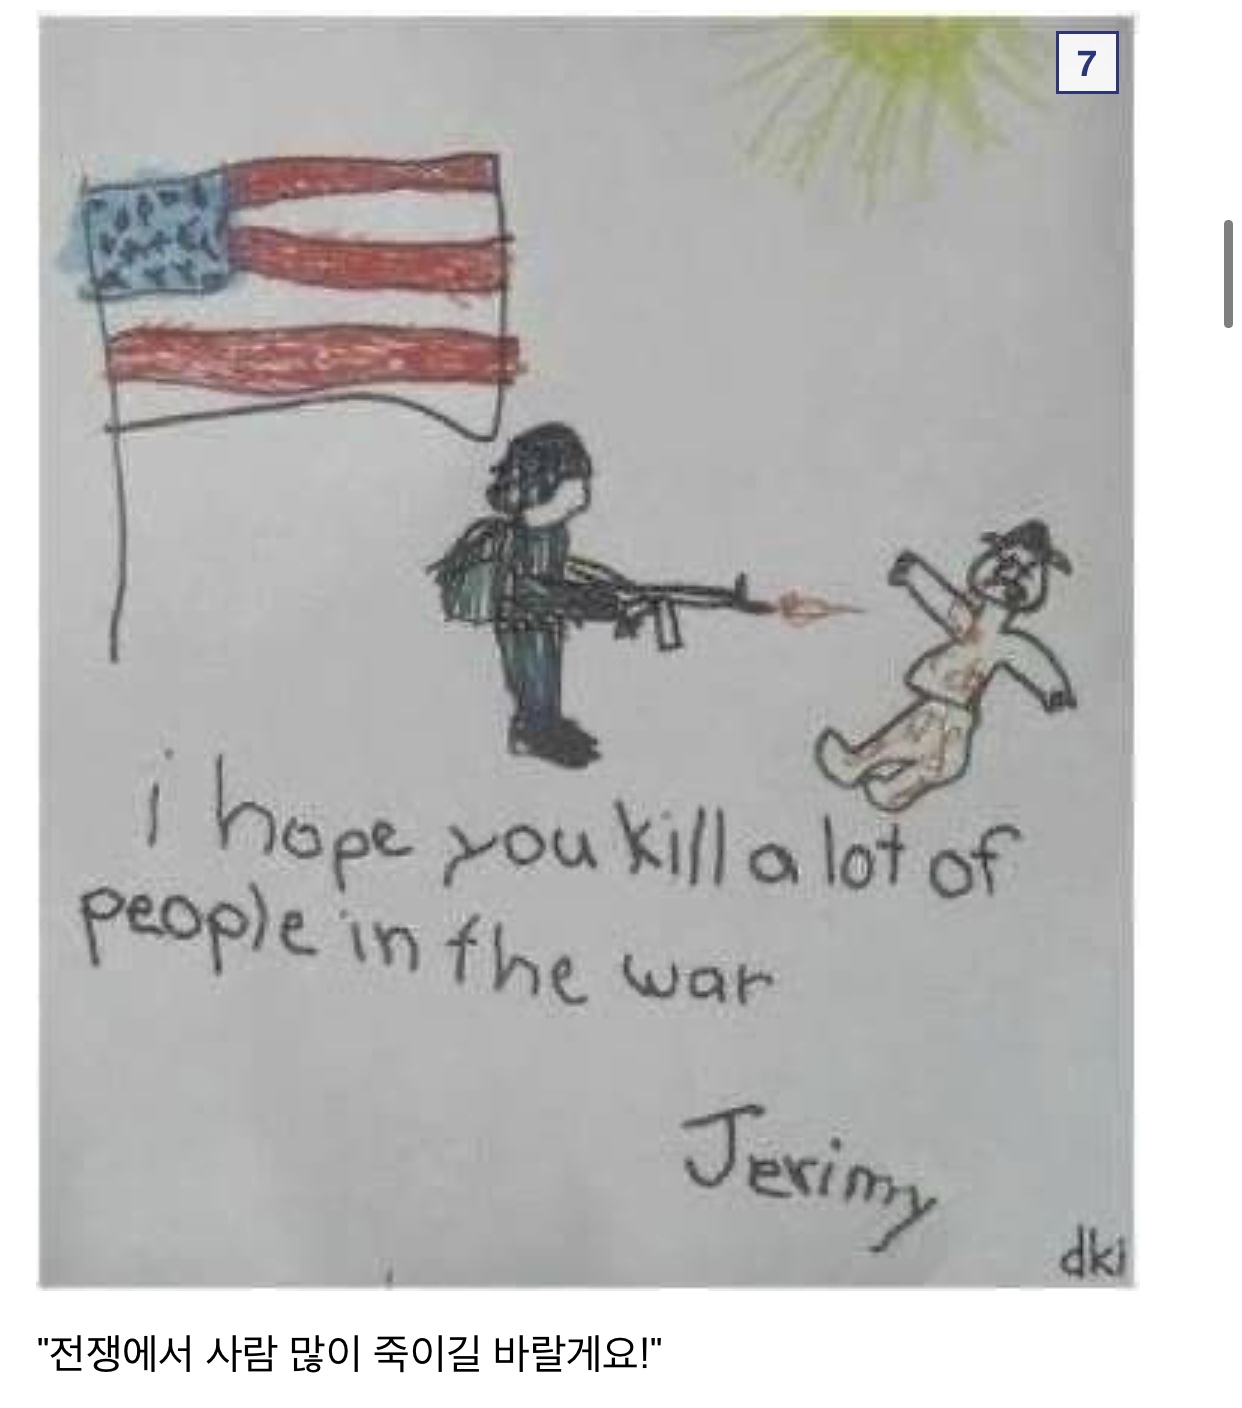 A letter to the US military.